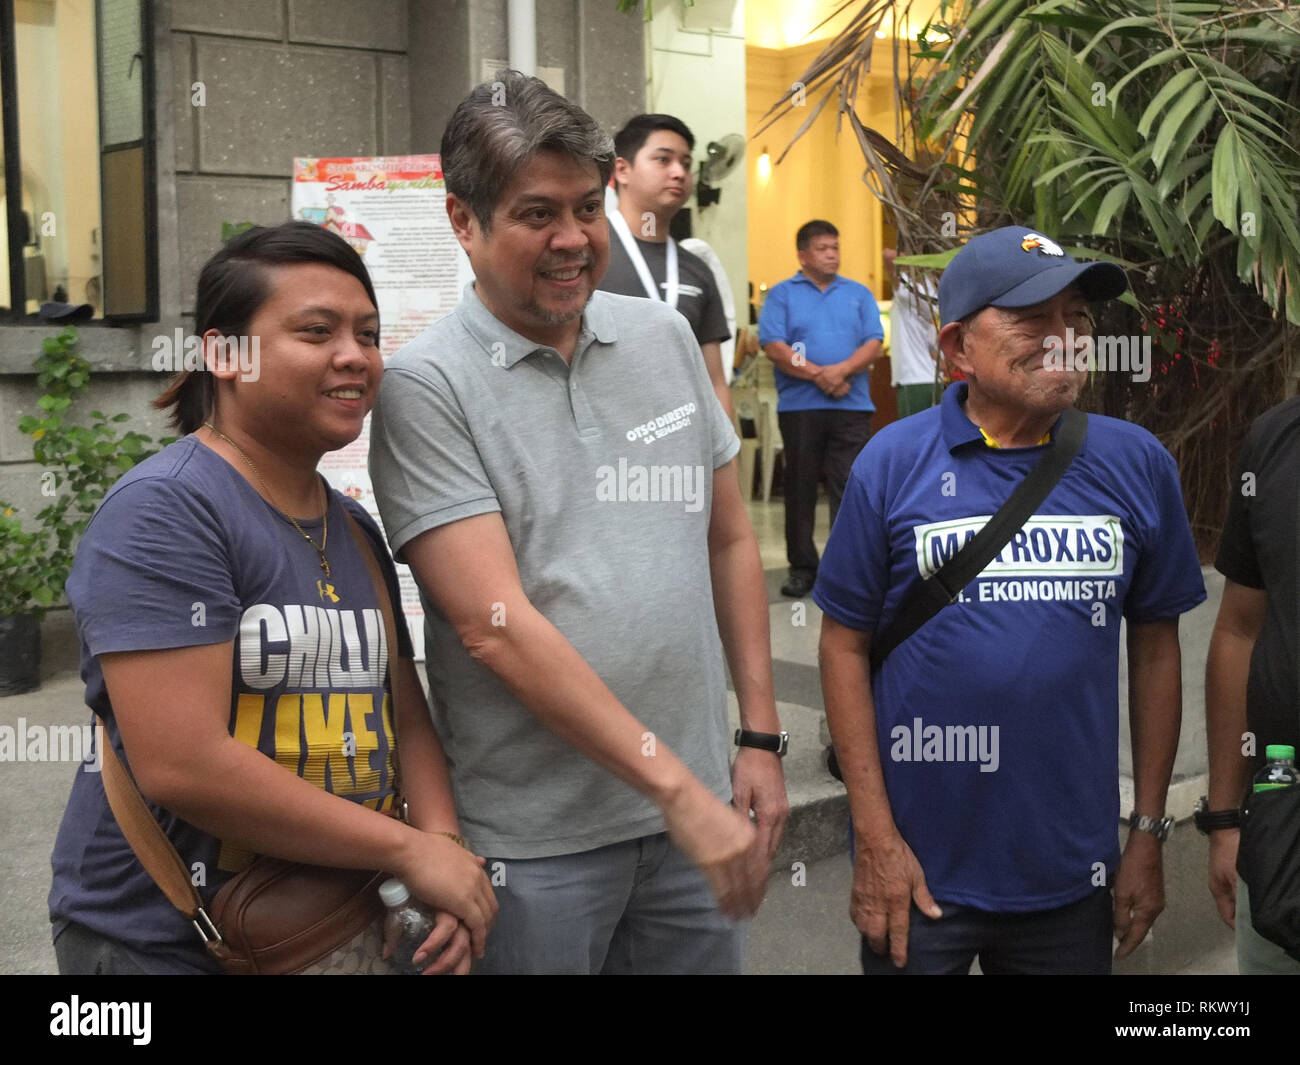 Senator Francis Pangilinan seen posing for picture with his supporters during the campaign. The Opposition Senatorial candidates, known as 'Otso Diretso' (means vote straight the 8 senatorial bets) kicked off their campaigns in Caloocan City. The Senatorial slate composed of experienced but relatively unknown opposition bets appeal to voting population that still supports the ruling Duterte Administration. Stock Photo